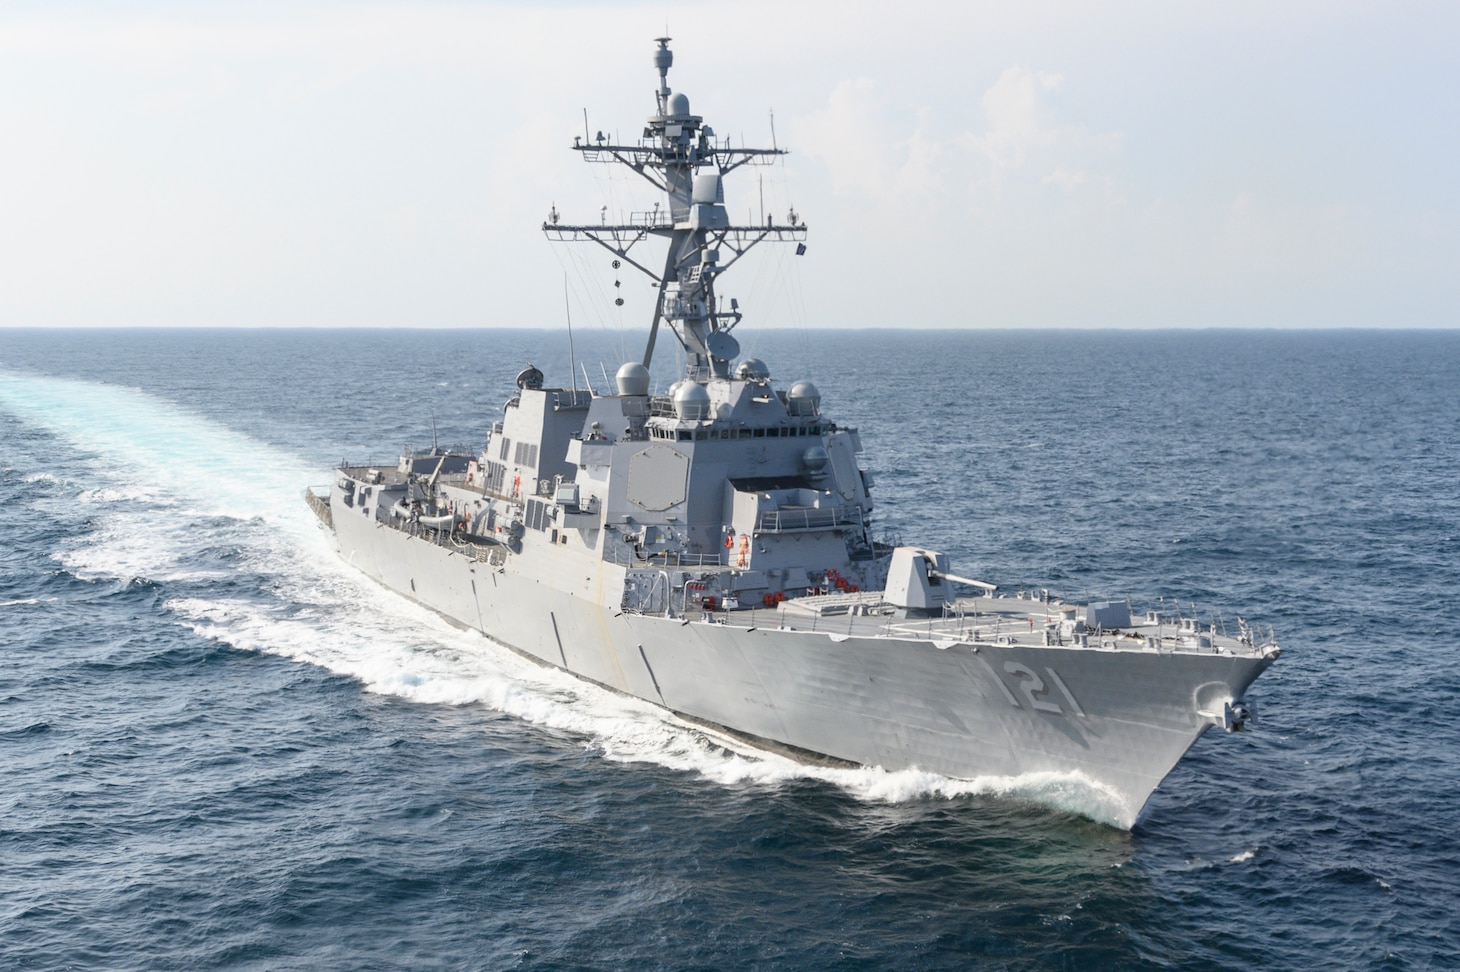 Frank E. Petersen Jr. (DDG 121) navigates in the Gulf of Mexico during bravo trials.